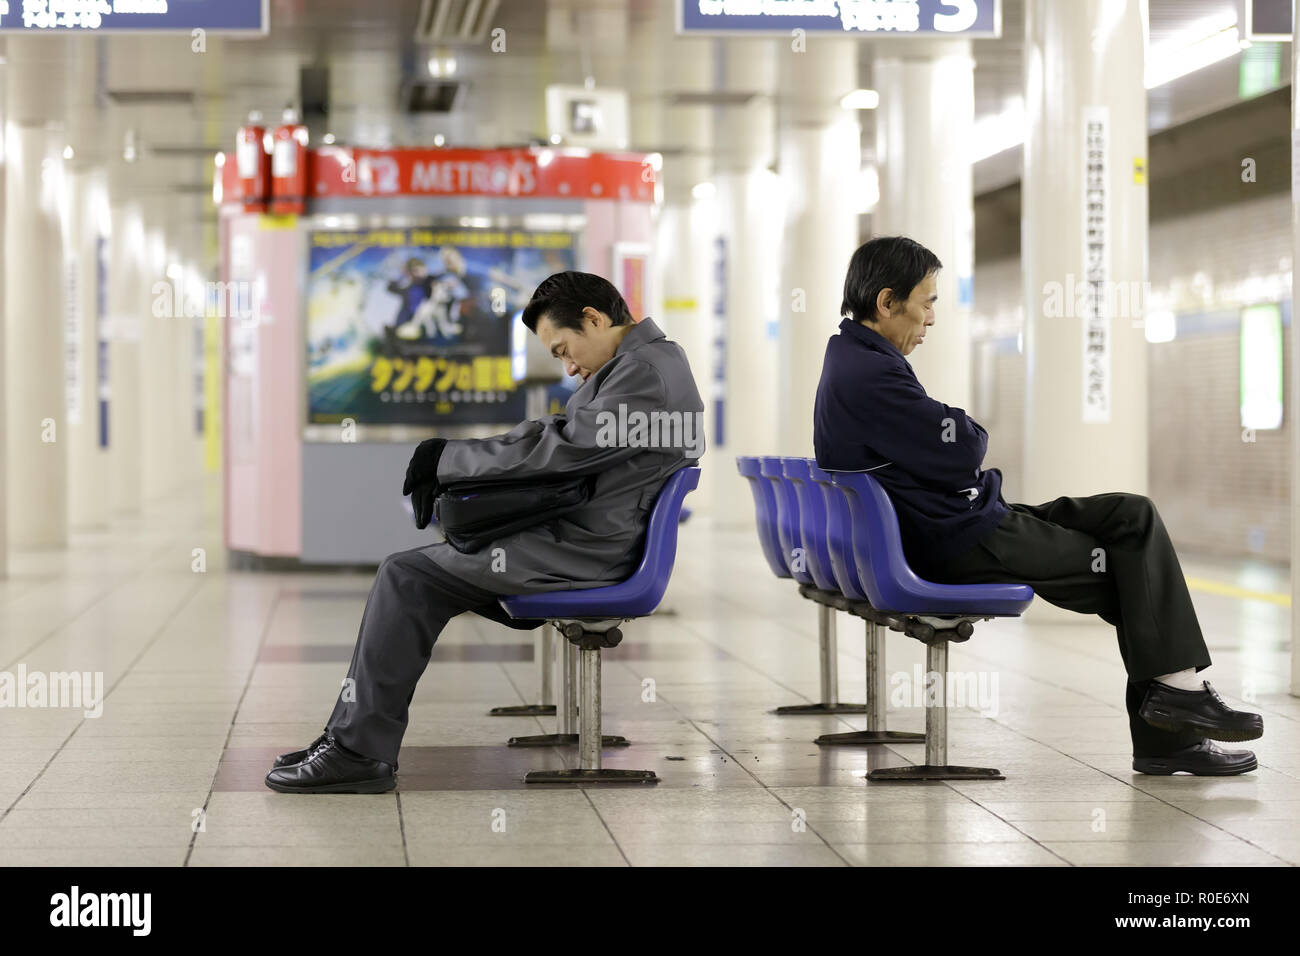 TOKYO - NOVEMBER 30: worker men waiting subway early morning and falling asleep on chairs on November 30, 2011 in Tokyo, Japan. Stock Photo